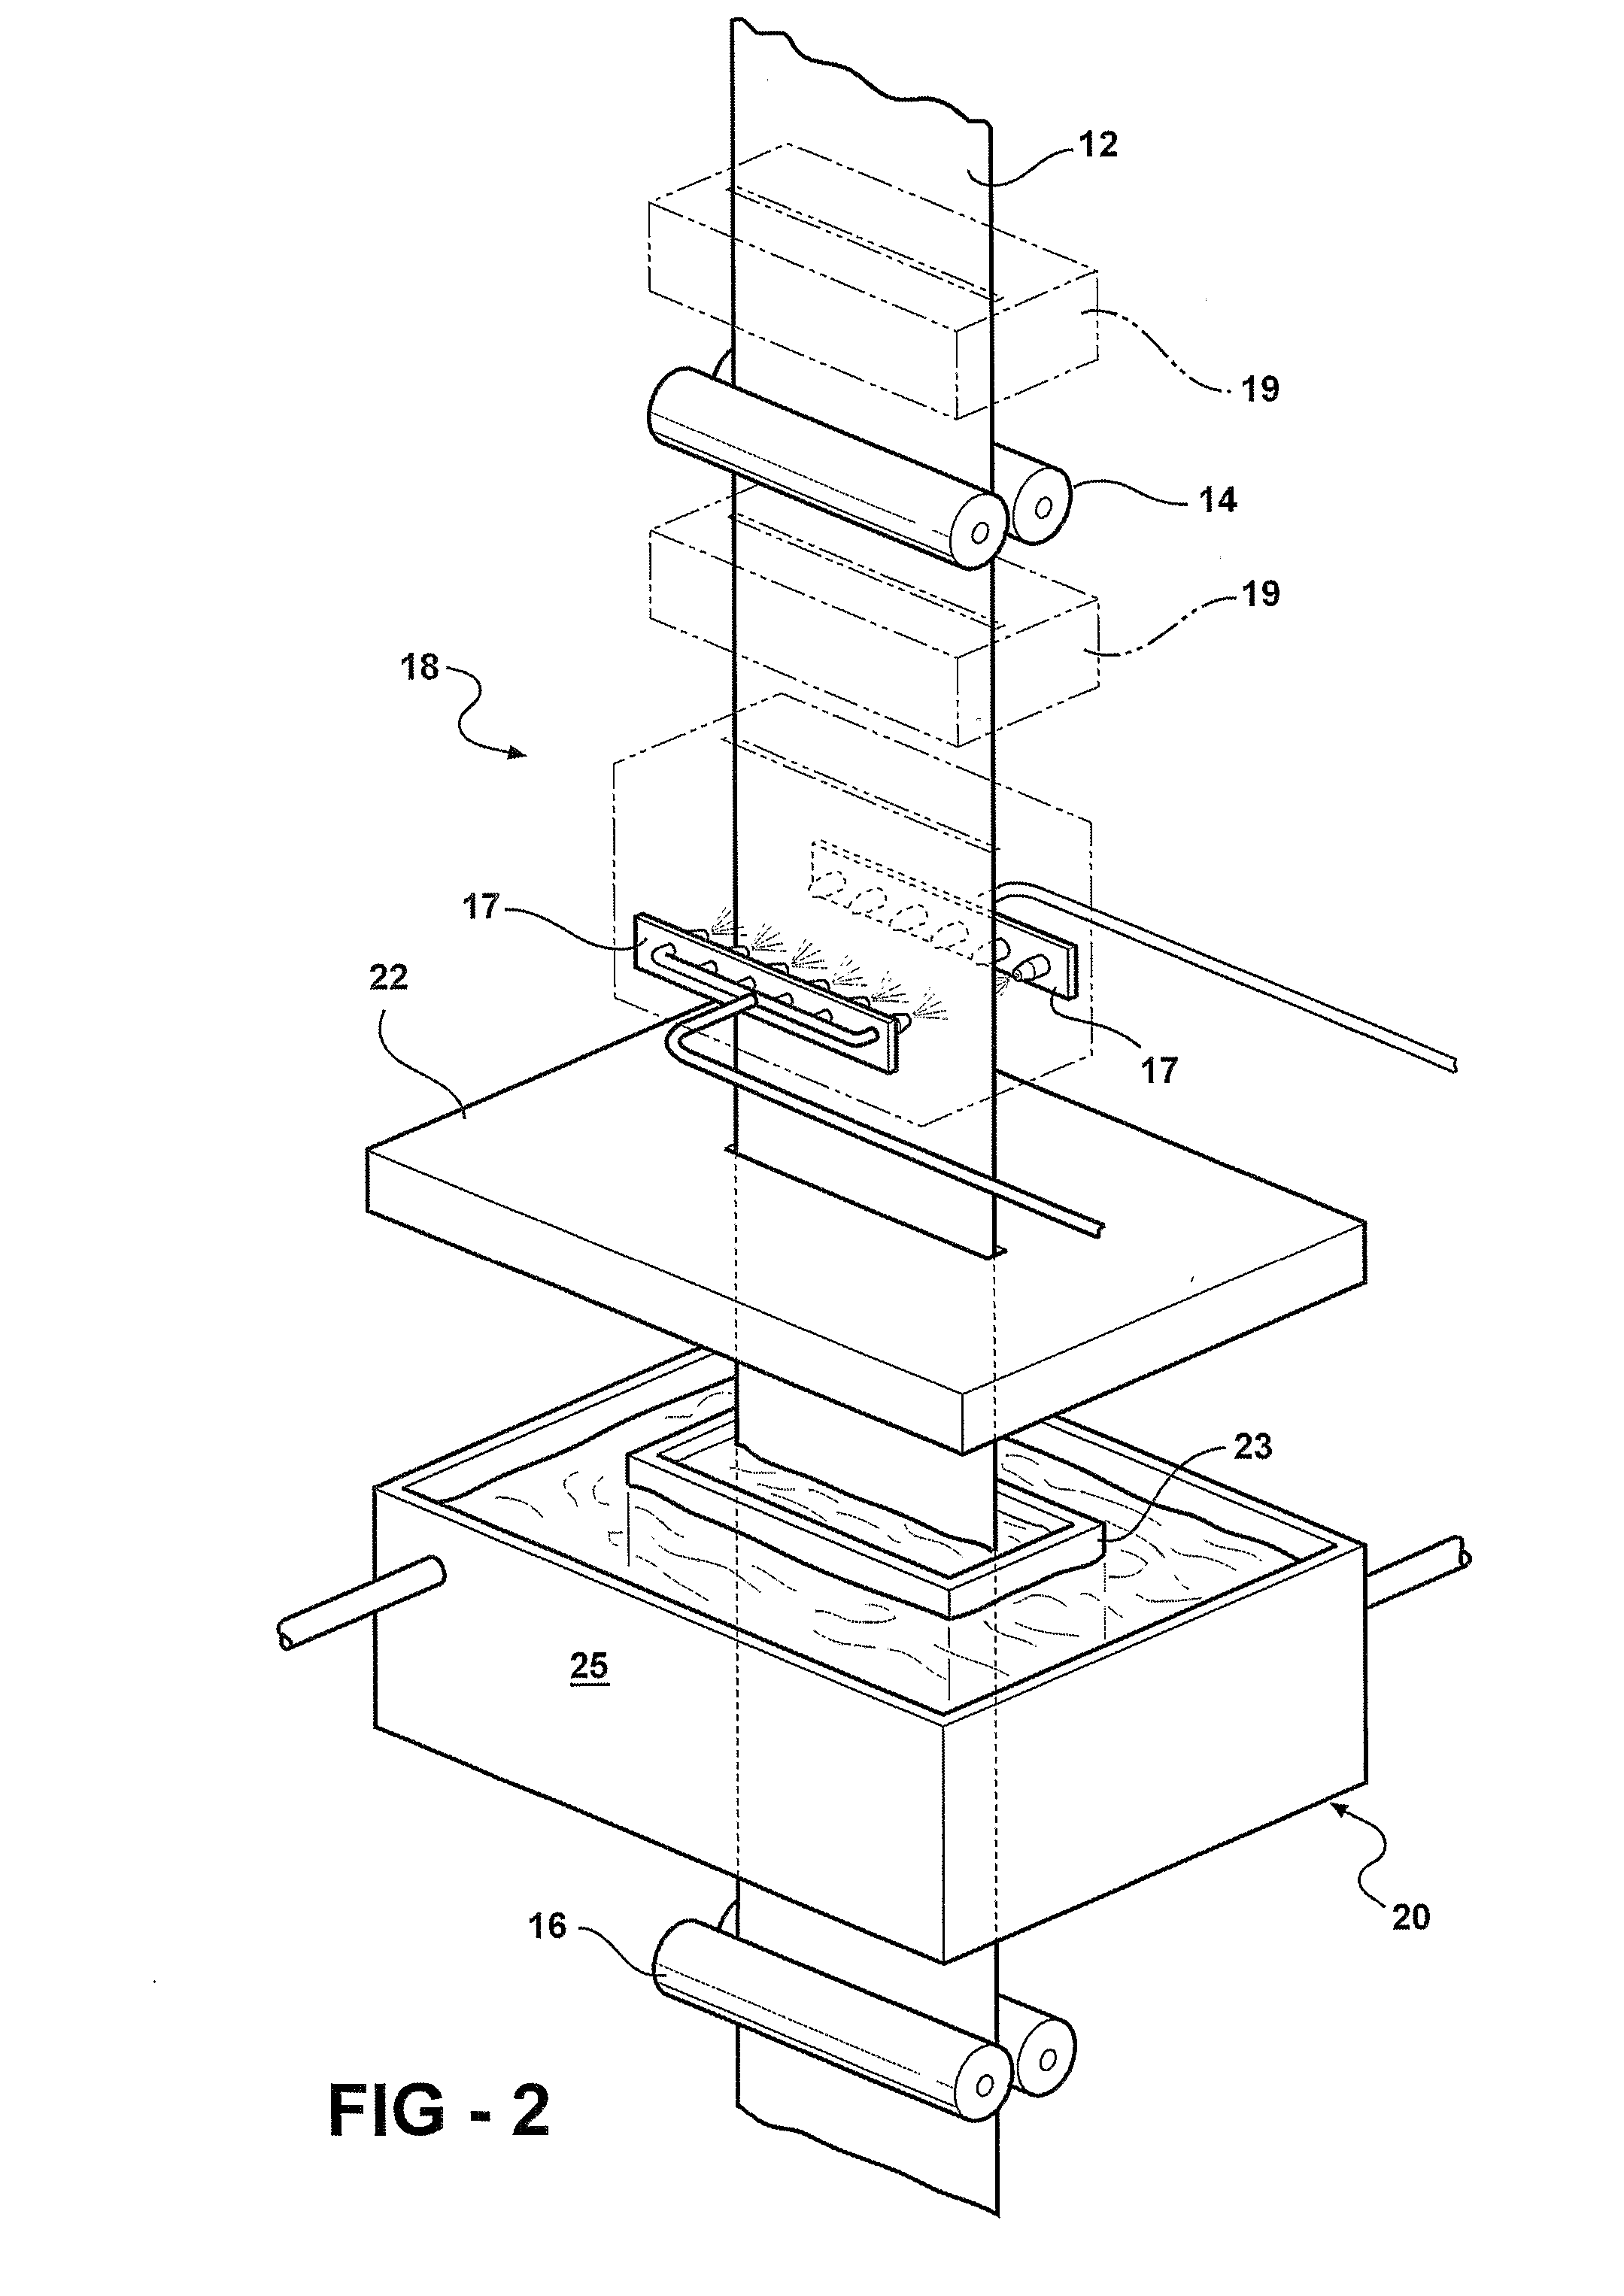 Method and Apparatus for Micro-Treating Iron-Based Alloy, and the Material Resulting Therefrom